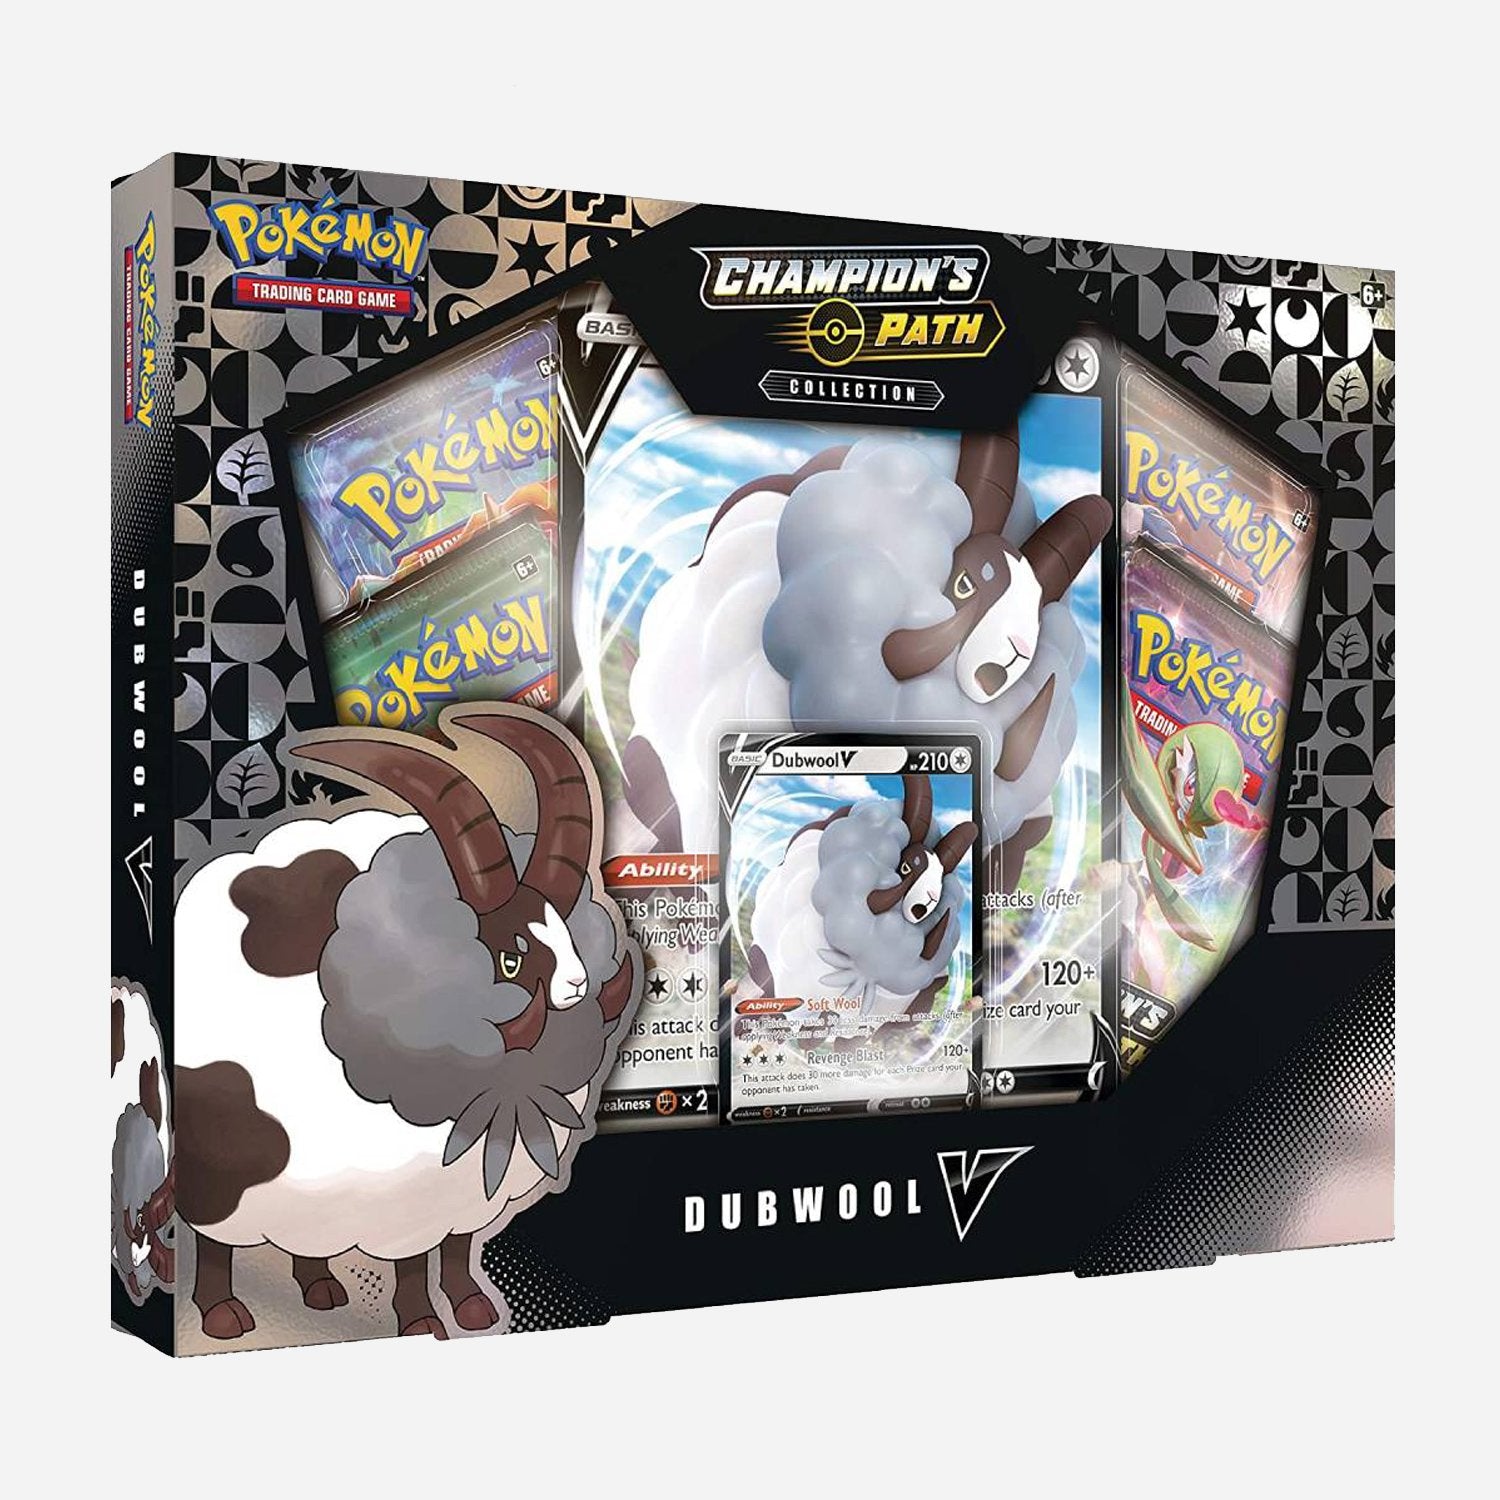 Shop For Pokemon Champions Path Card Game Online The Sm Store